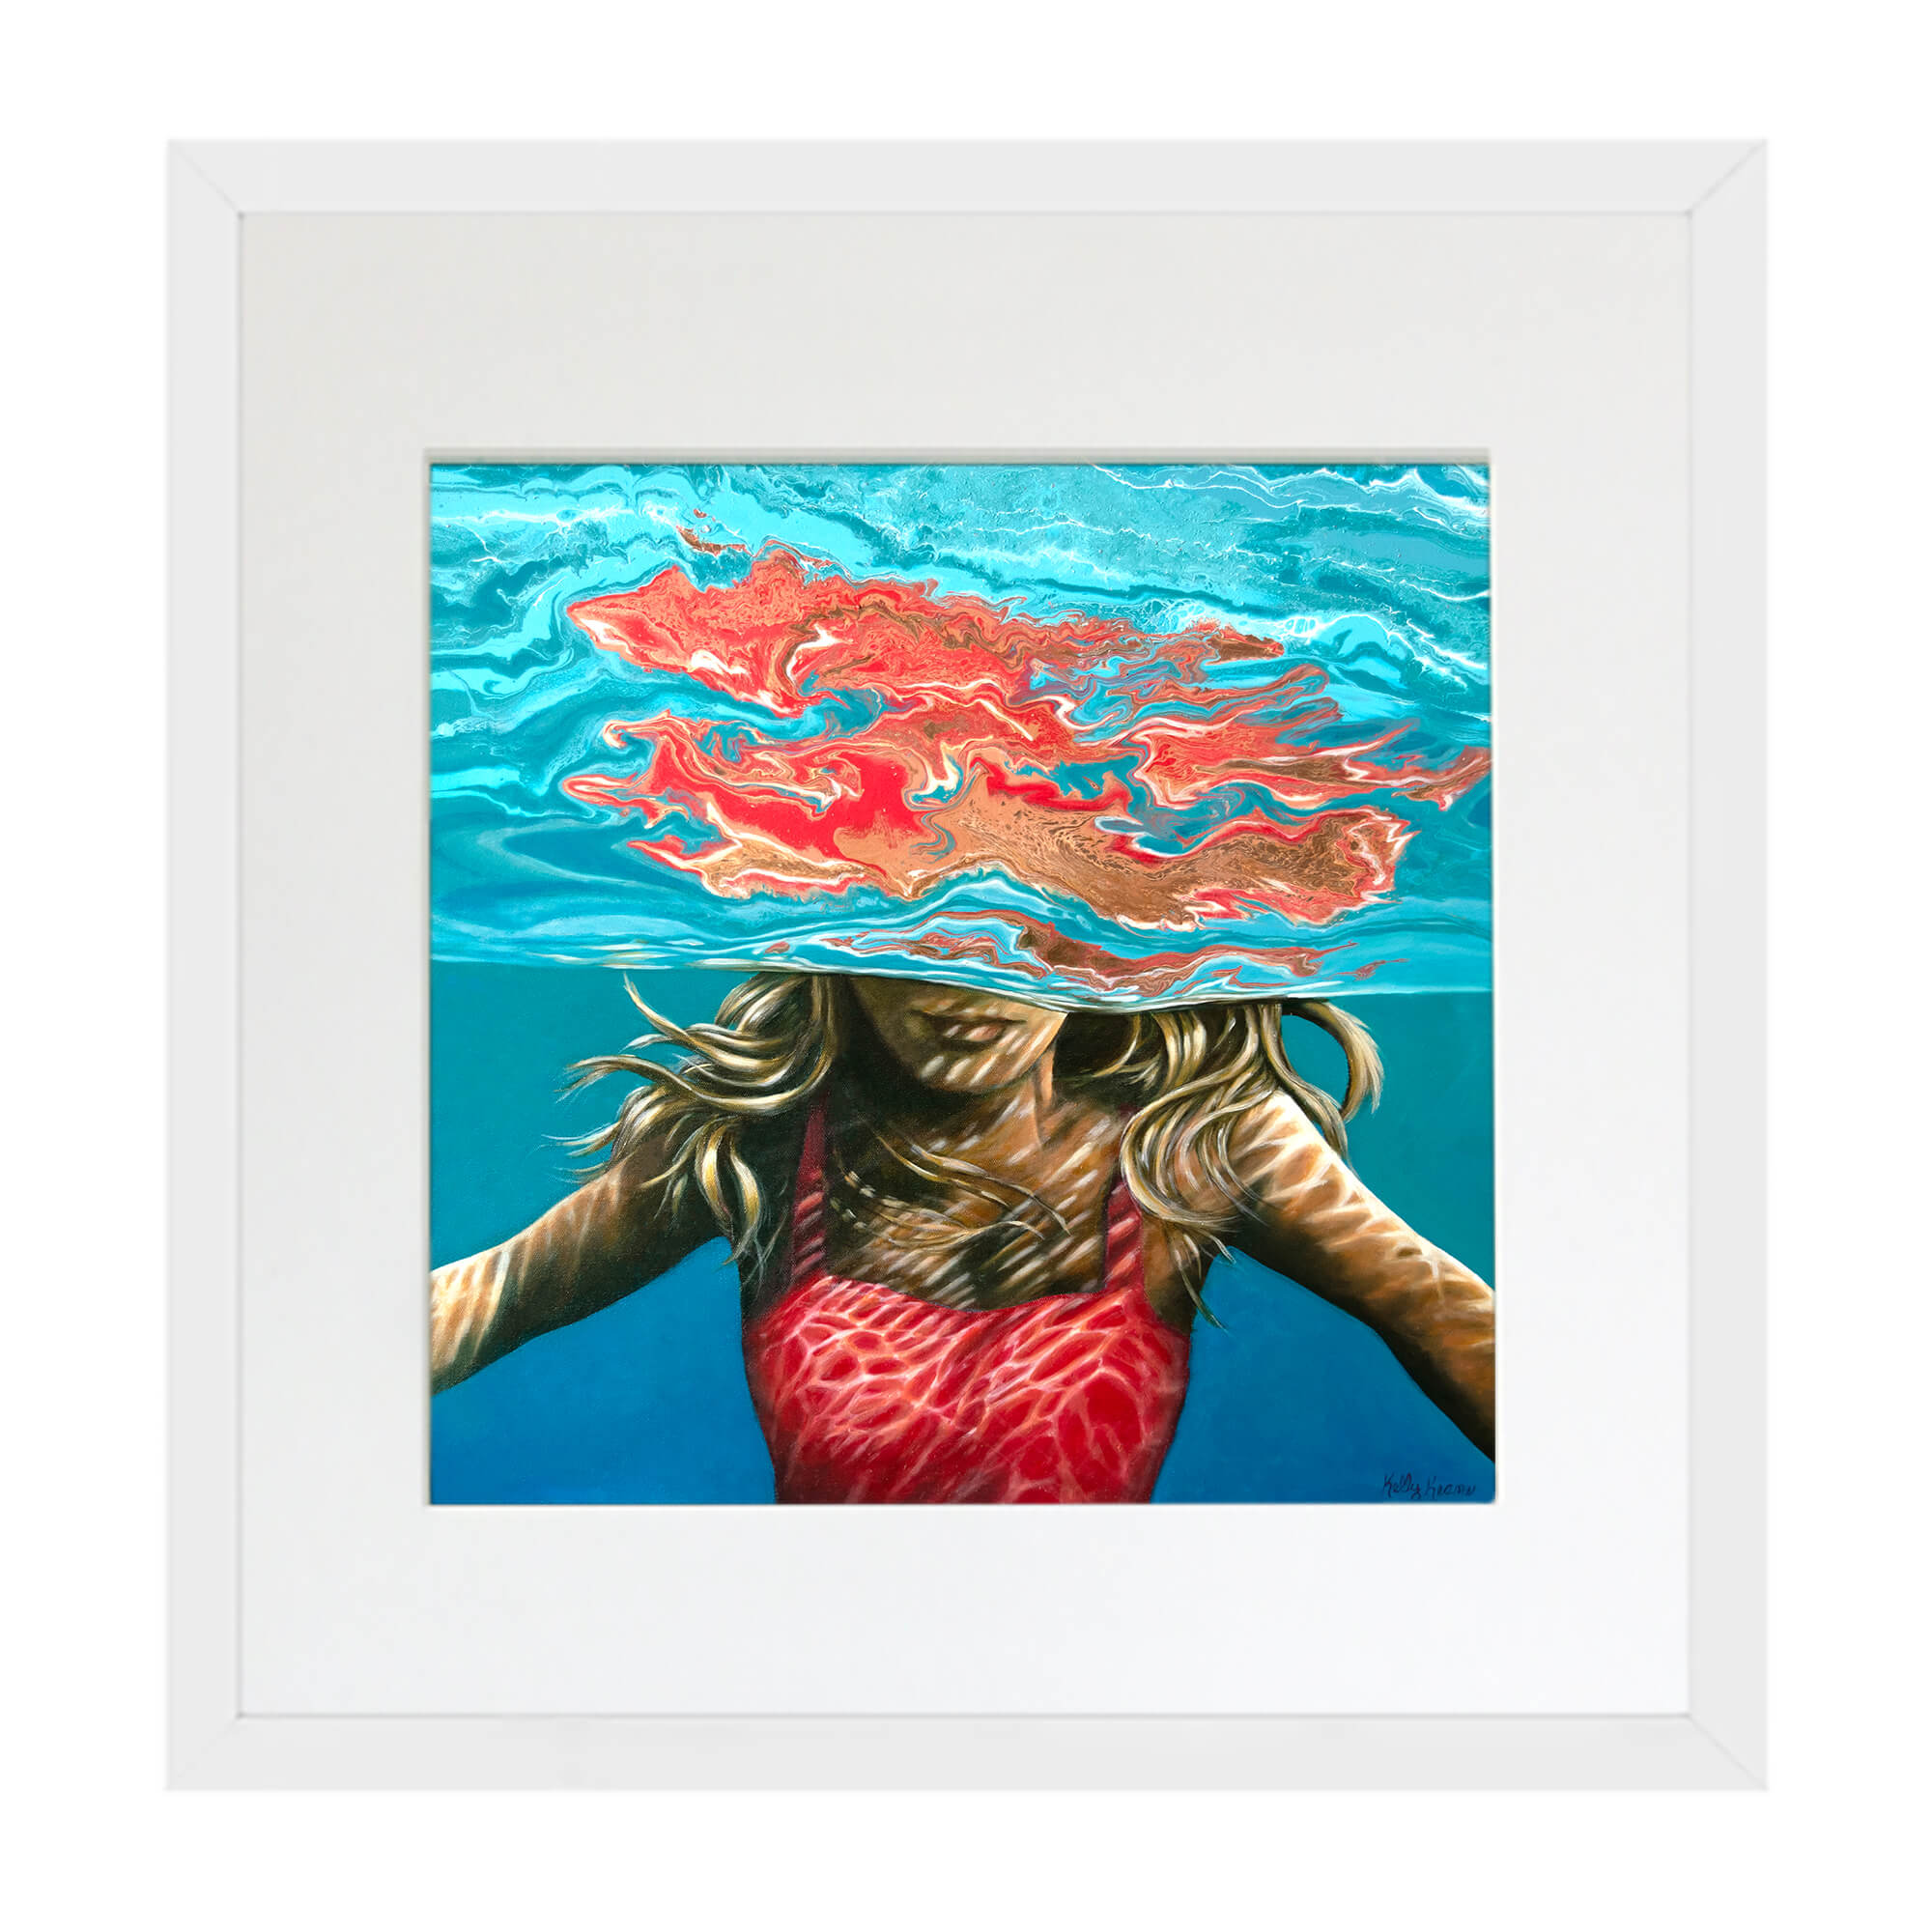 Matted art print with white frame featuring a woman wearing bikini  by hawaii artist Kelly Keane